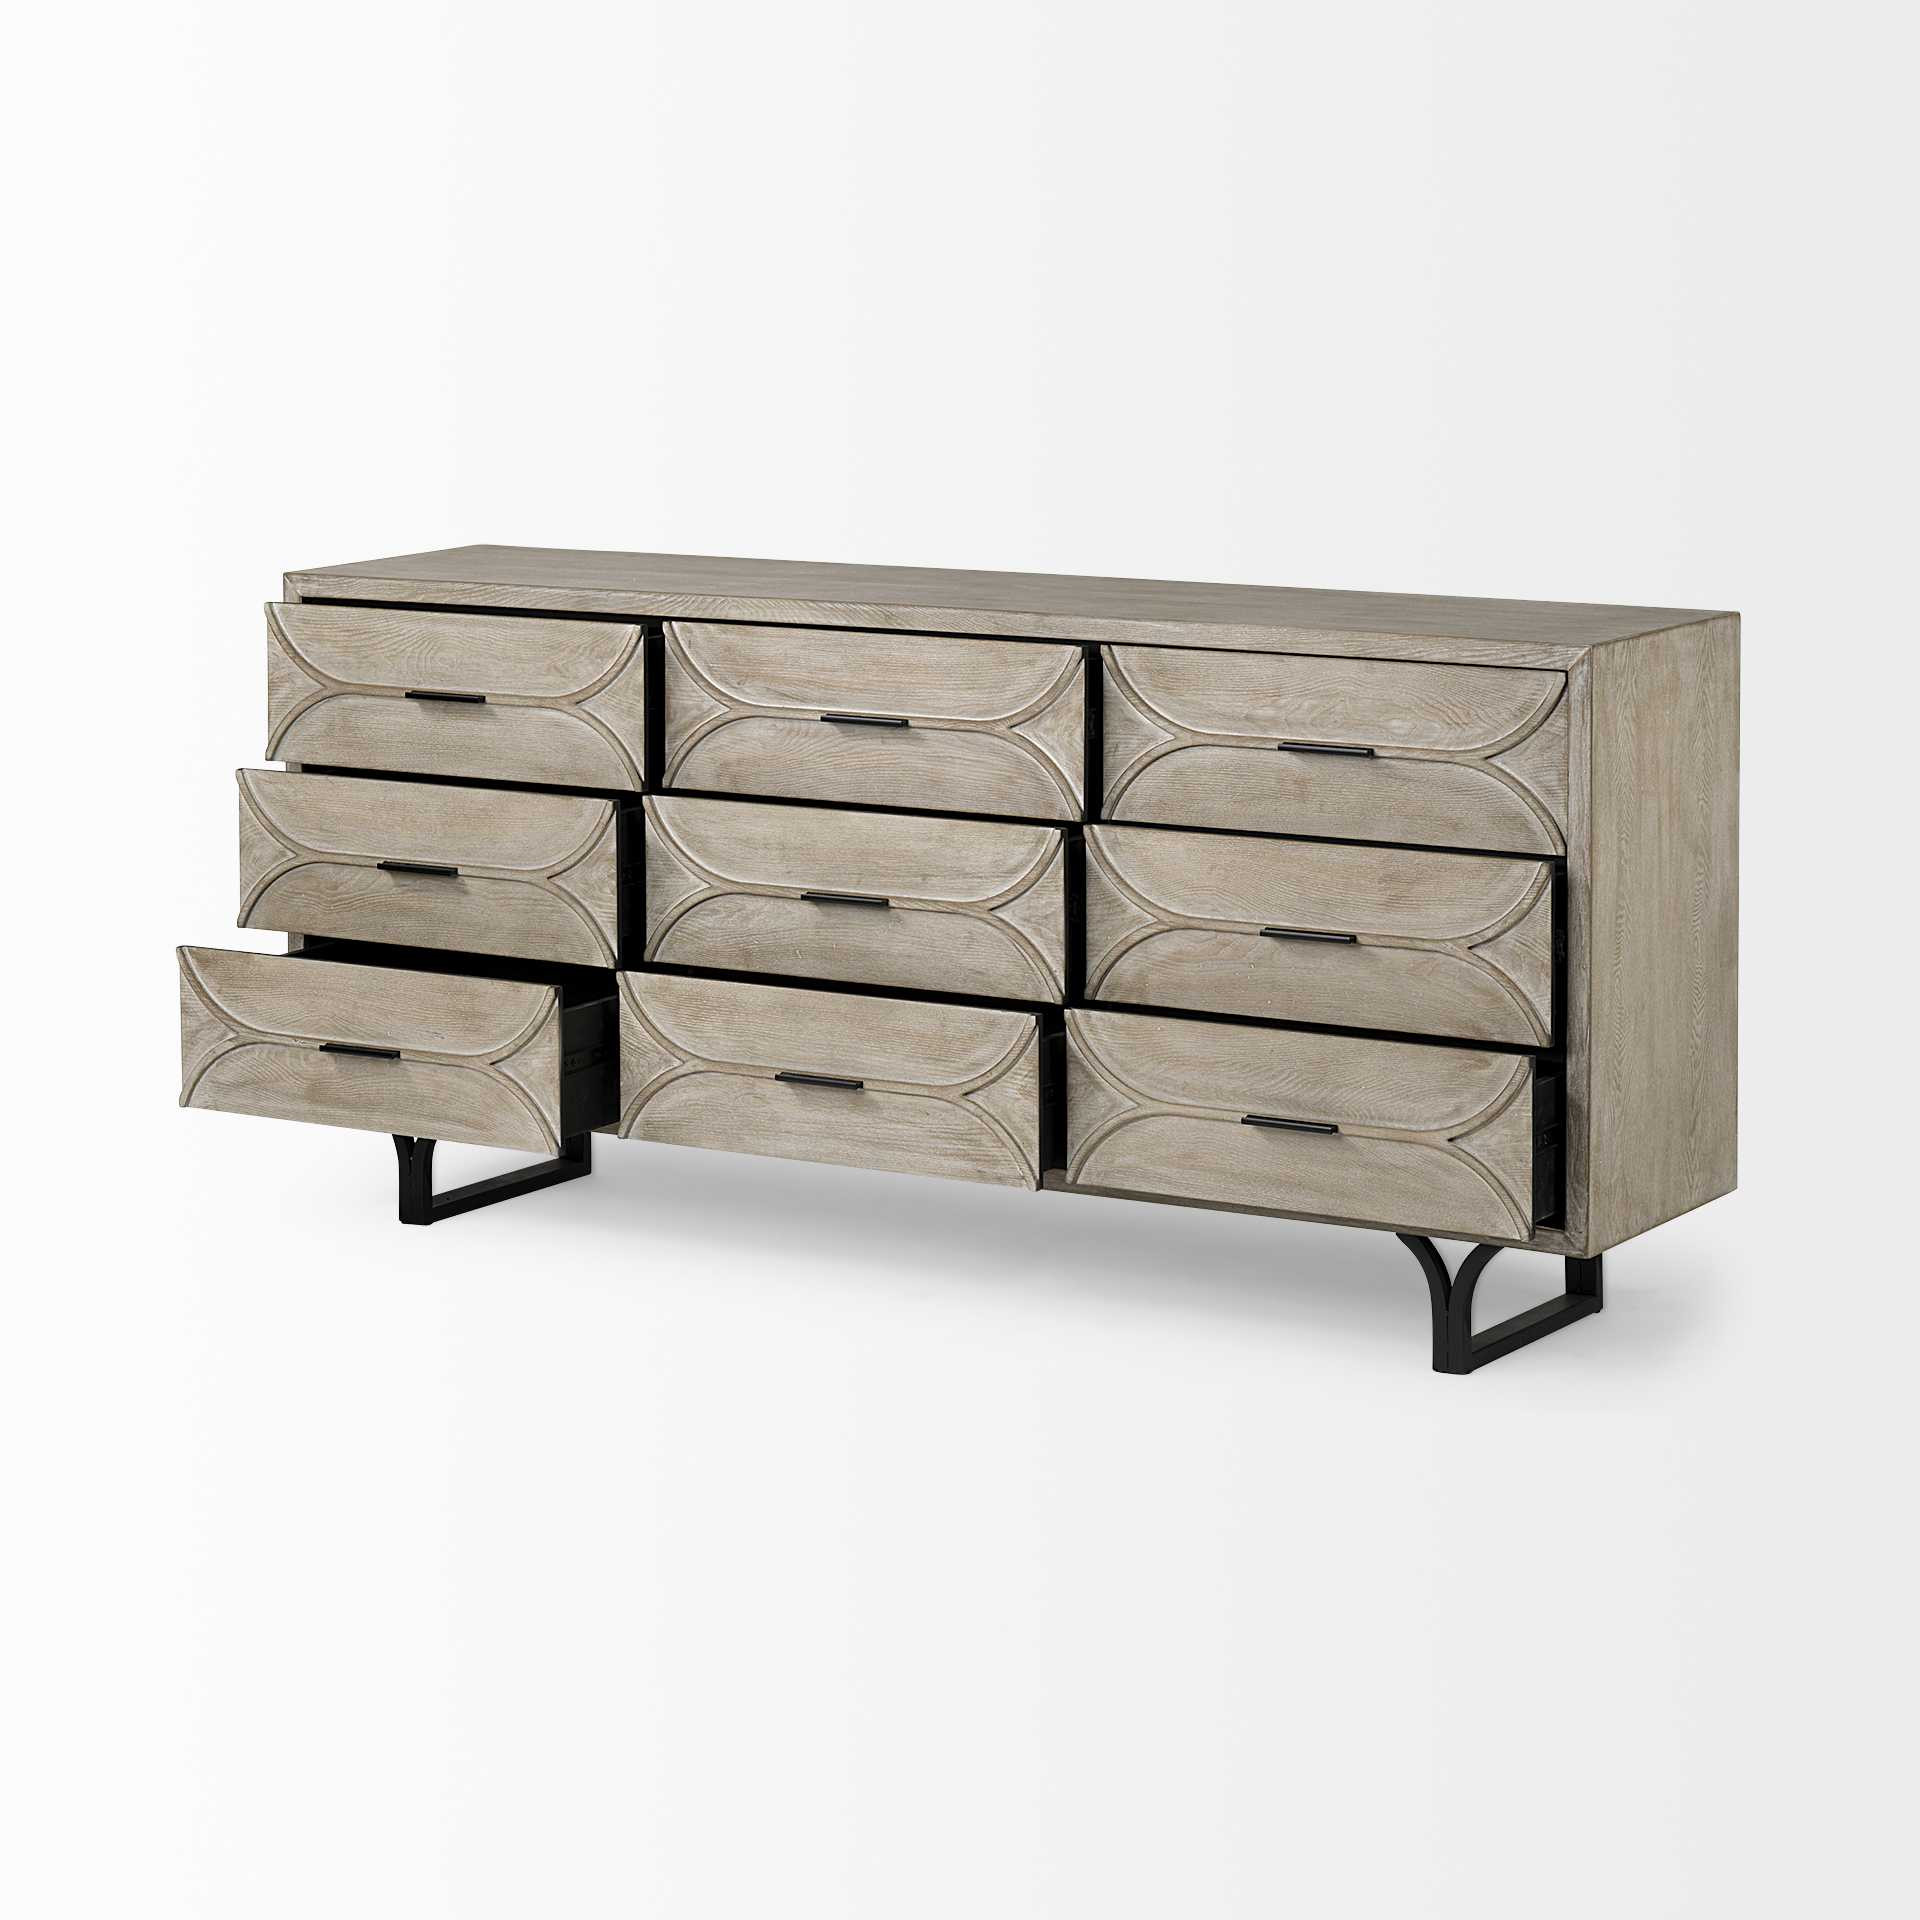 Light Brown And White Solid Mango Wood Finish Sideboard With 9 Drawers